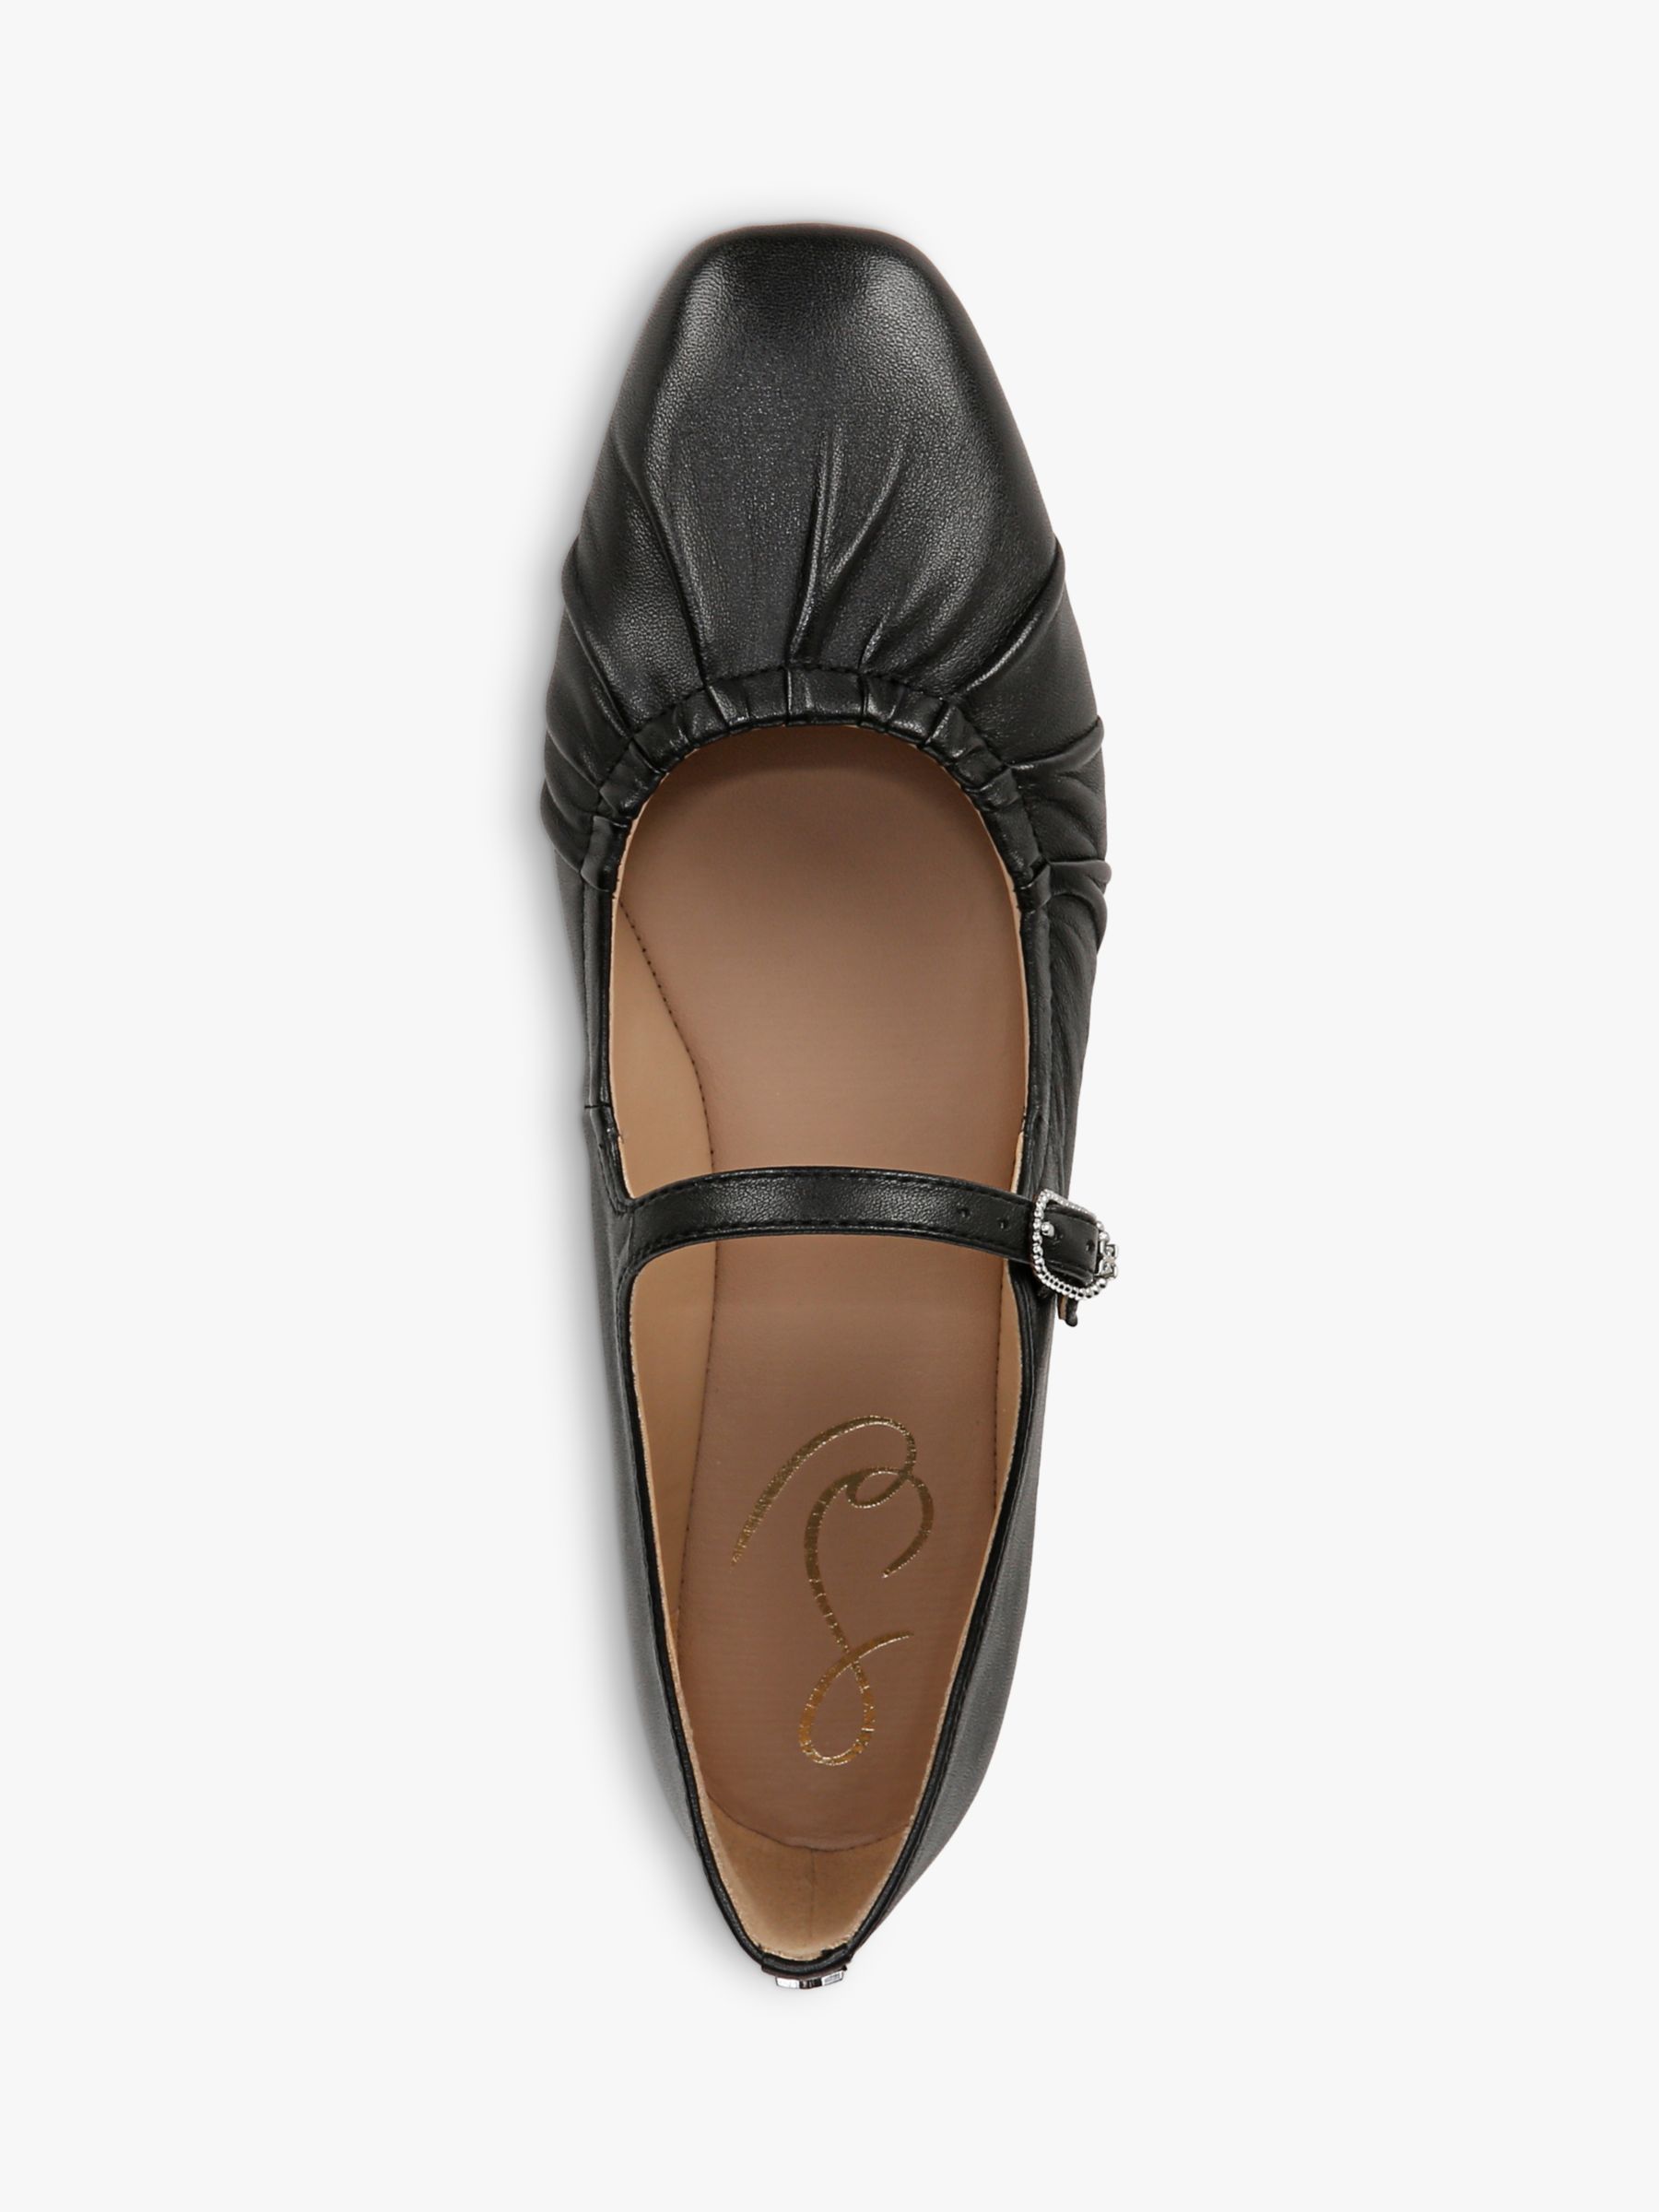 Buy Sam Edelman Micah Leather Mary Jane Shoes Online at johnlewis.com